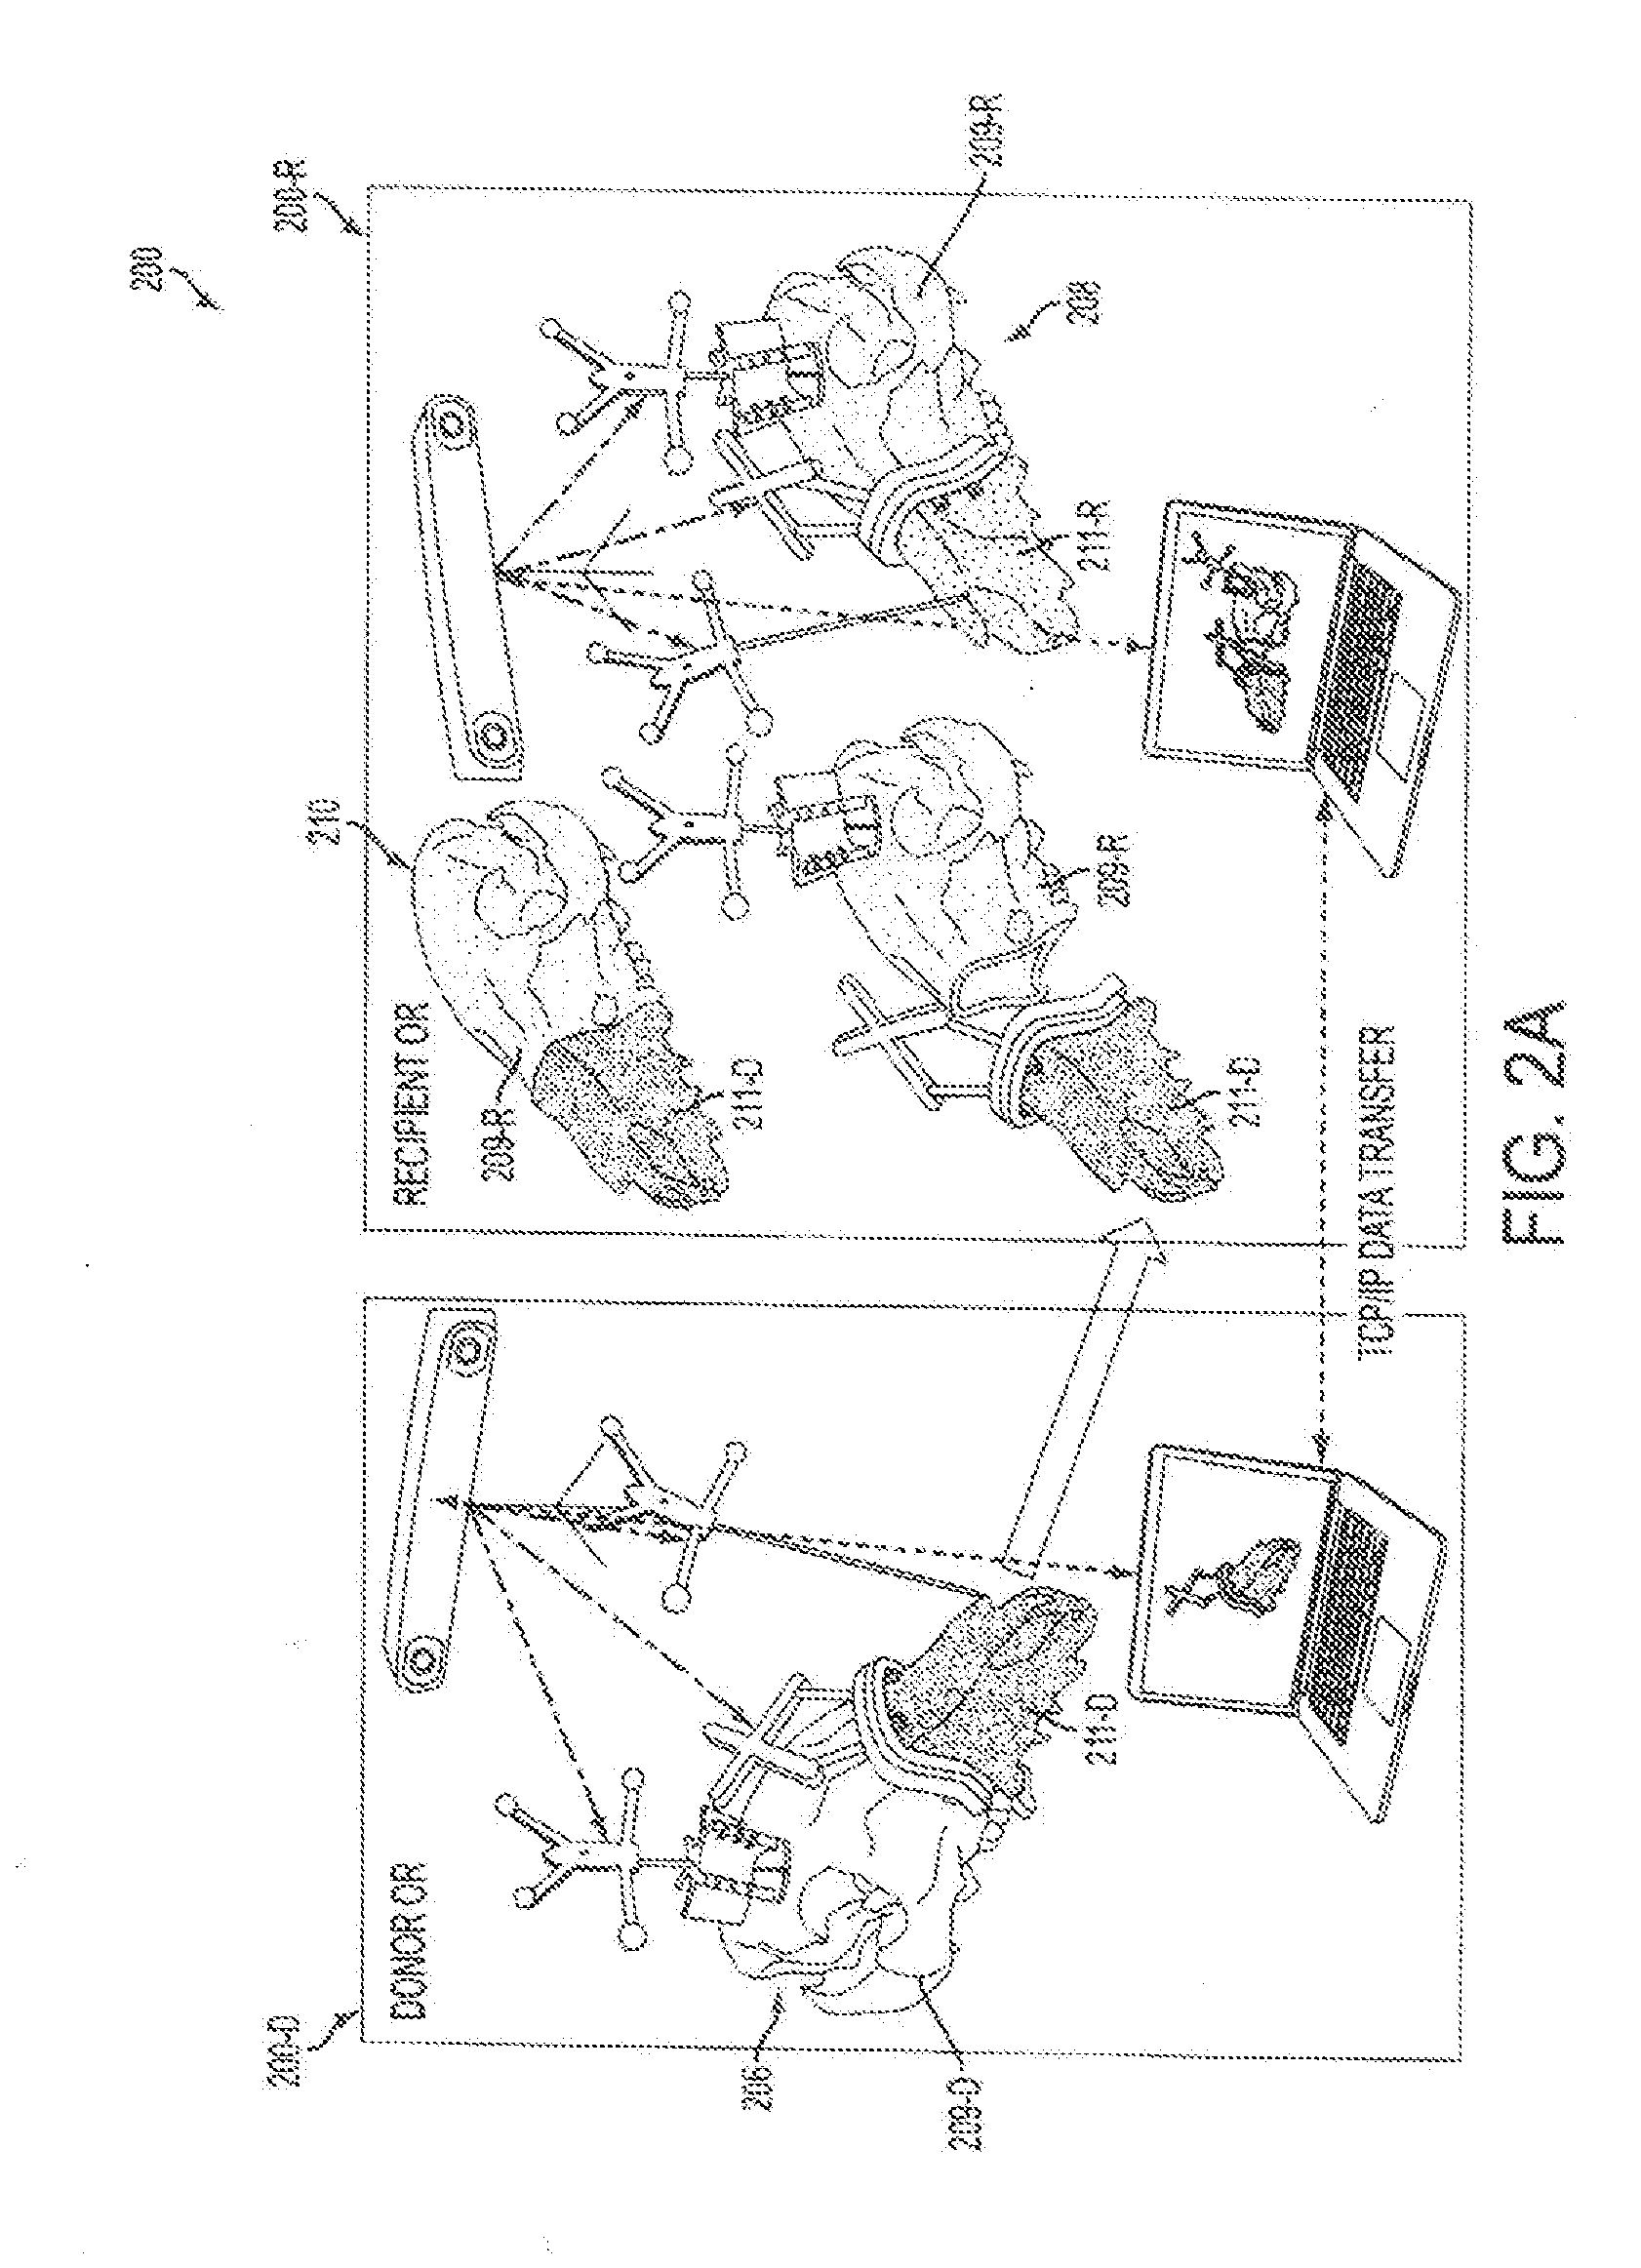 Computer-assisted planning and execution system